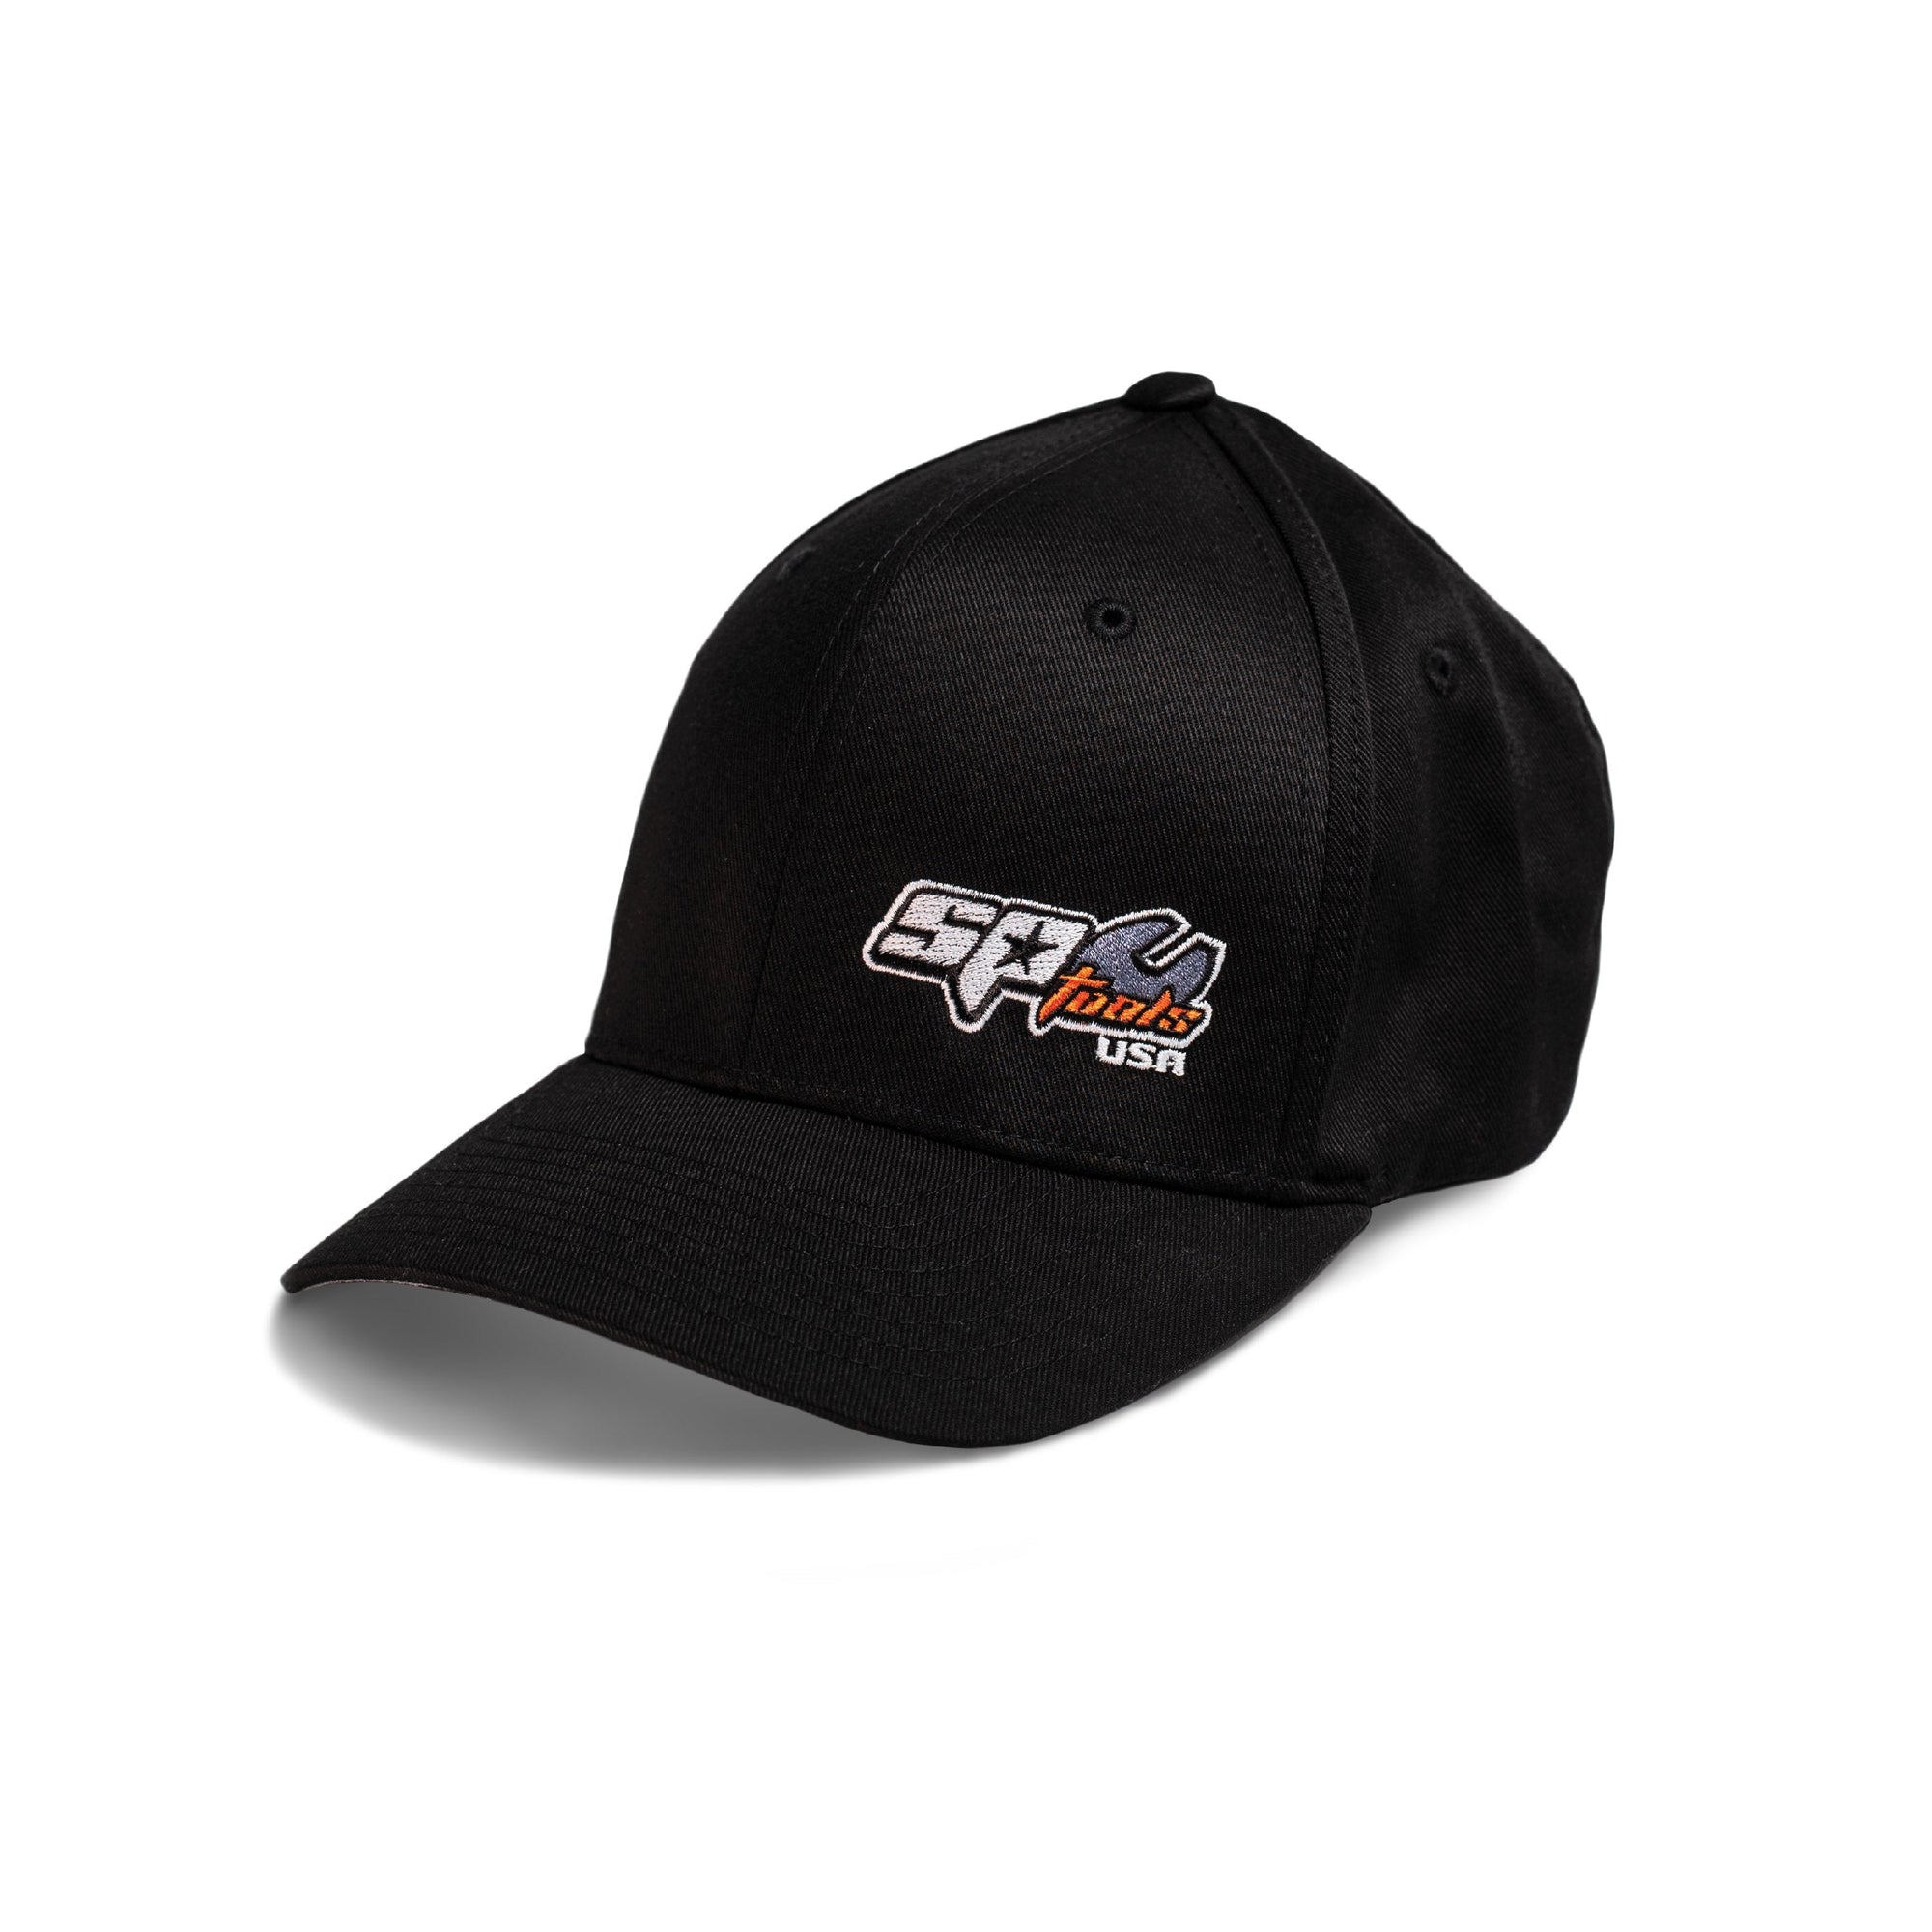 SP Fitted Hats